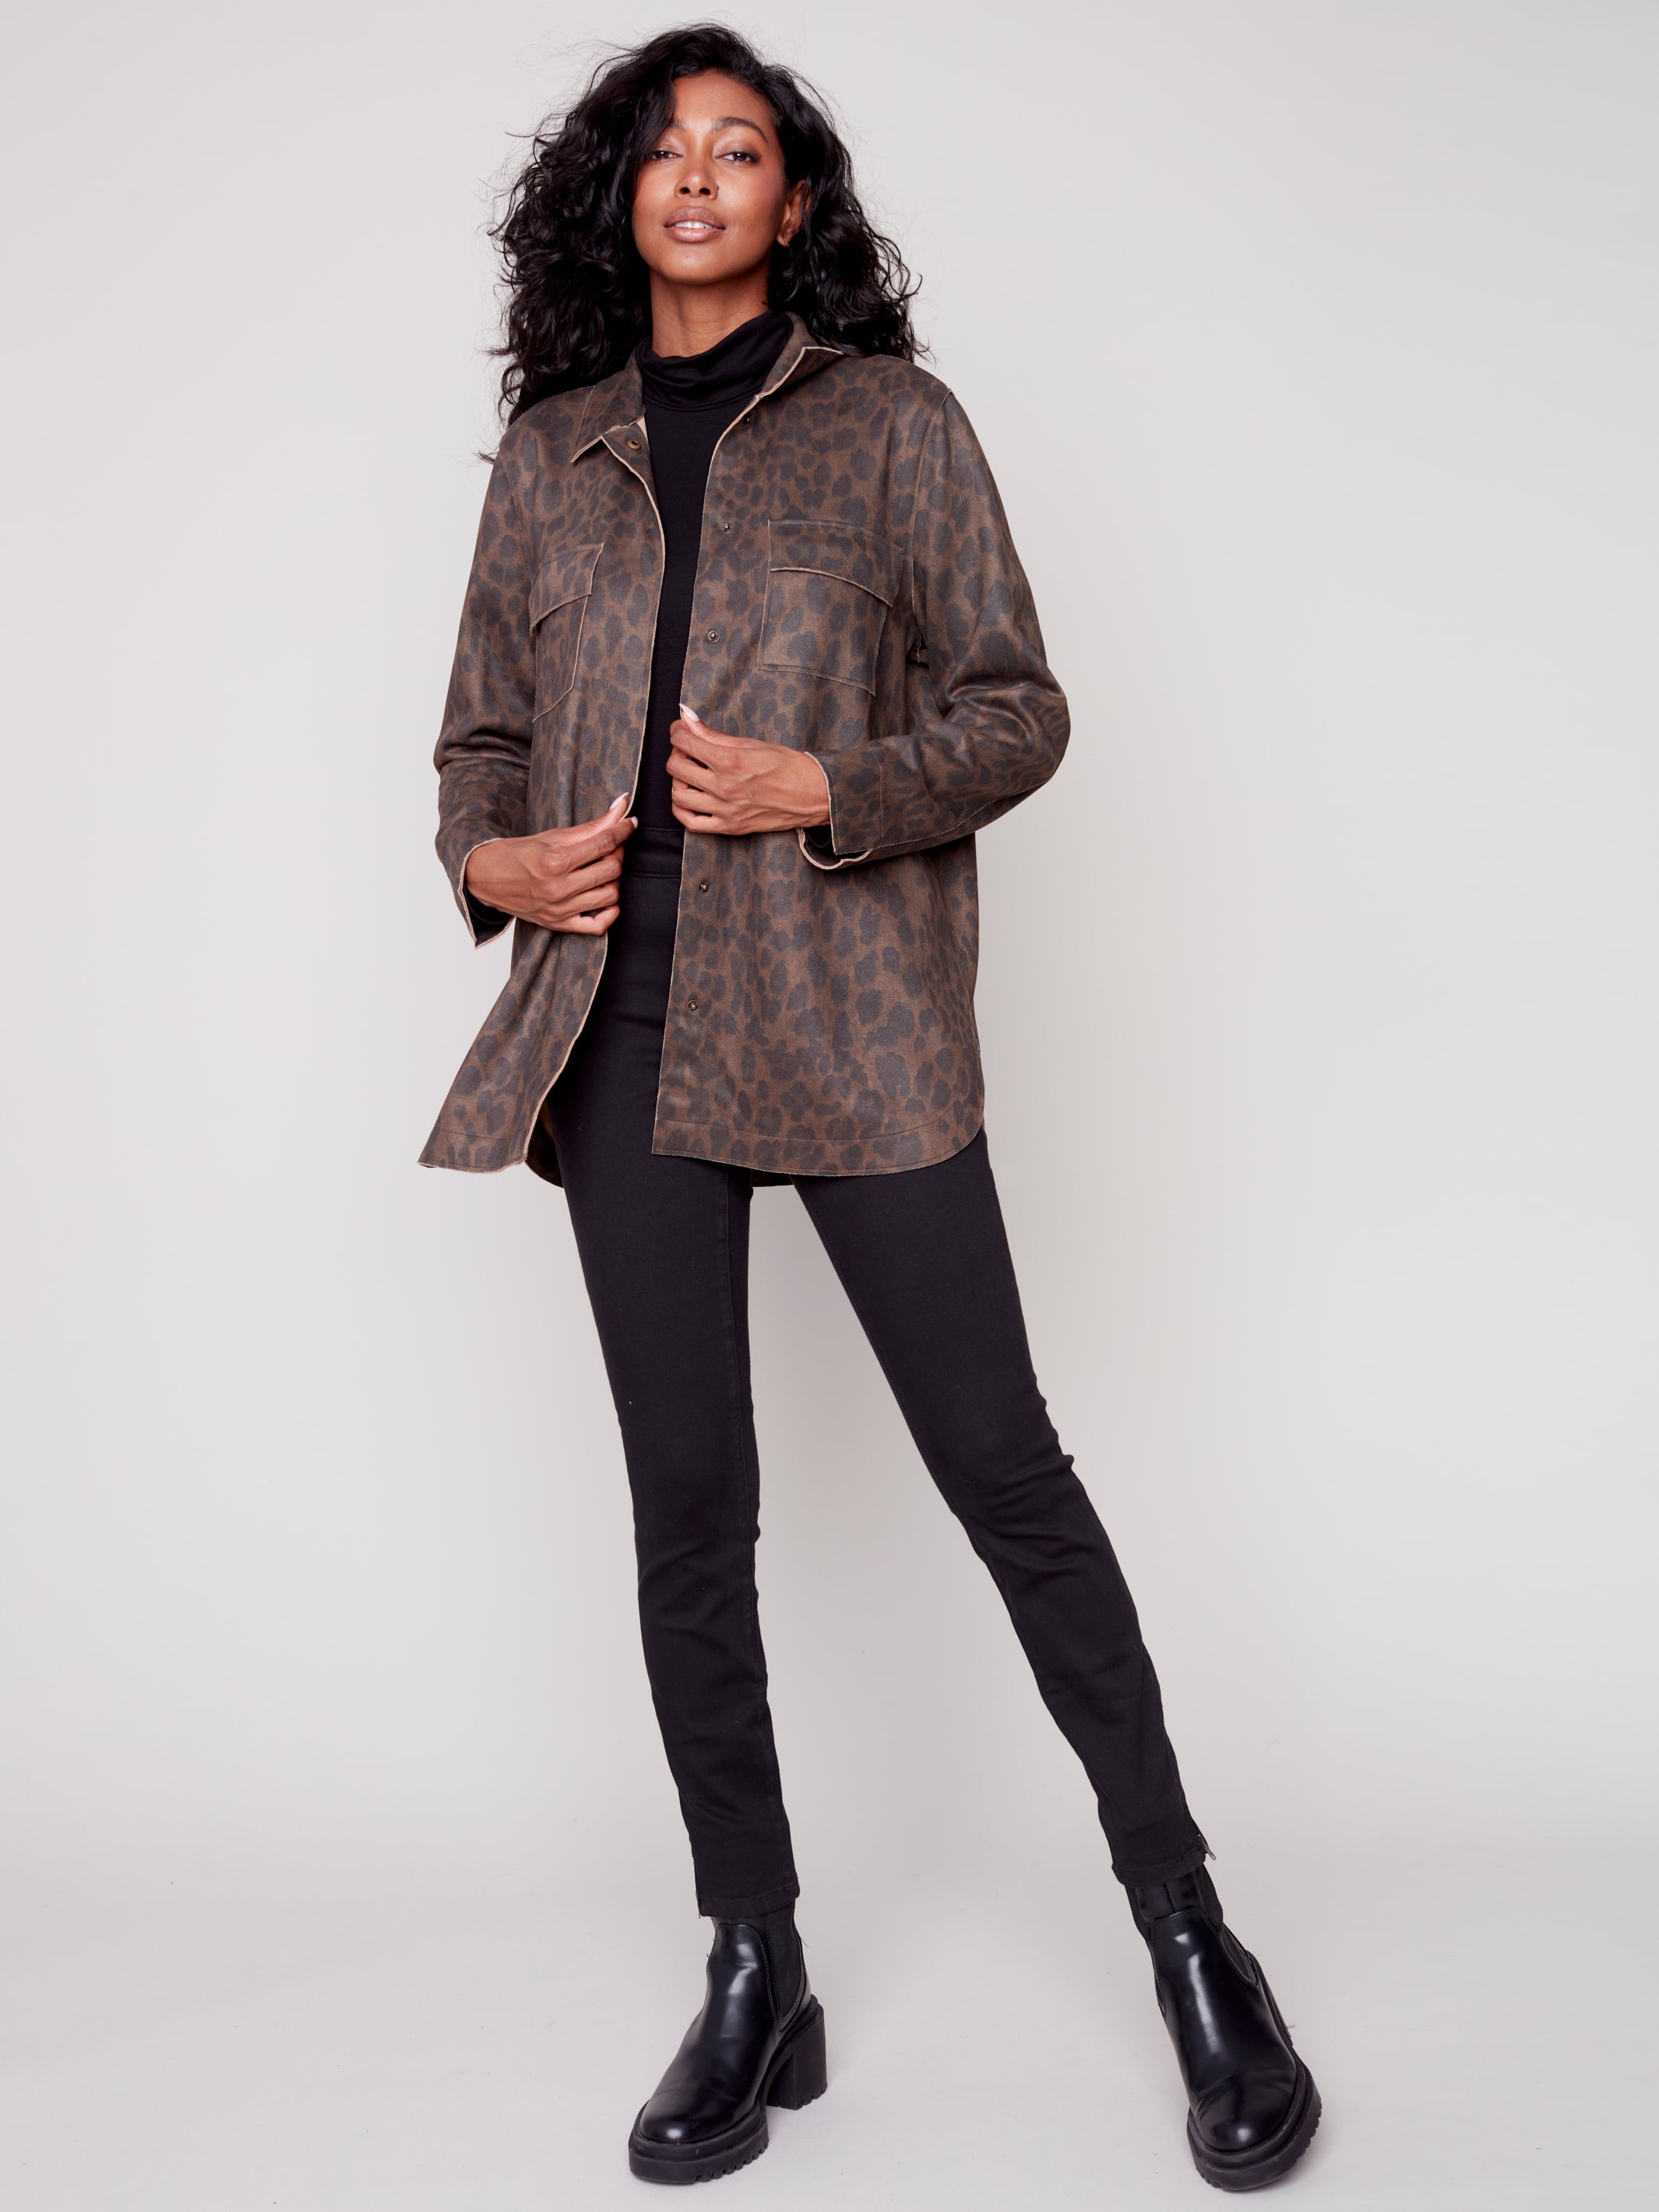 Animal Print Faux Suede Shacket by Charlie B